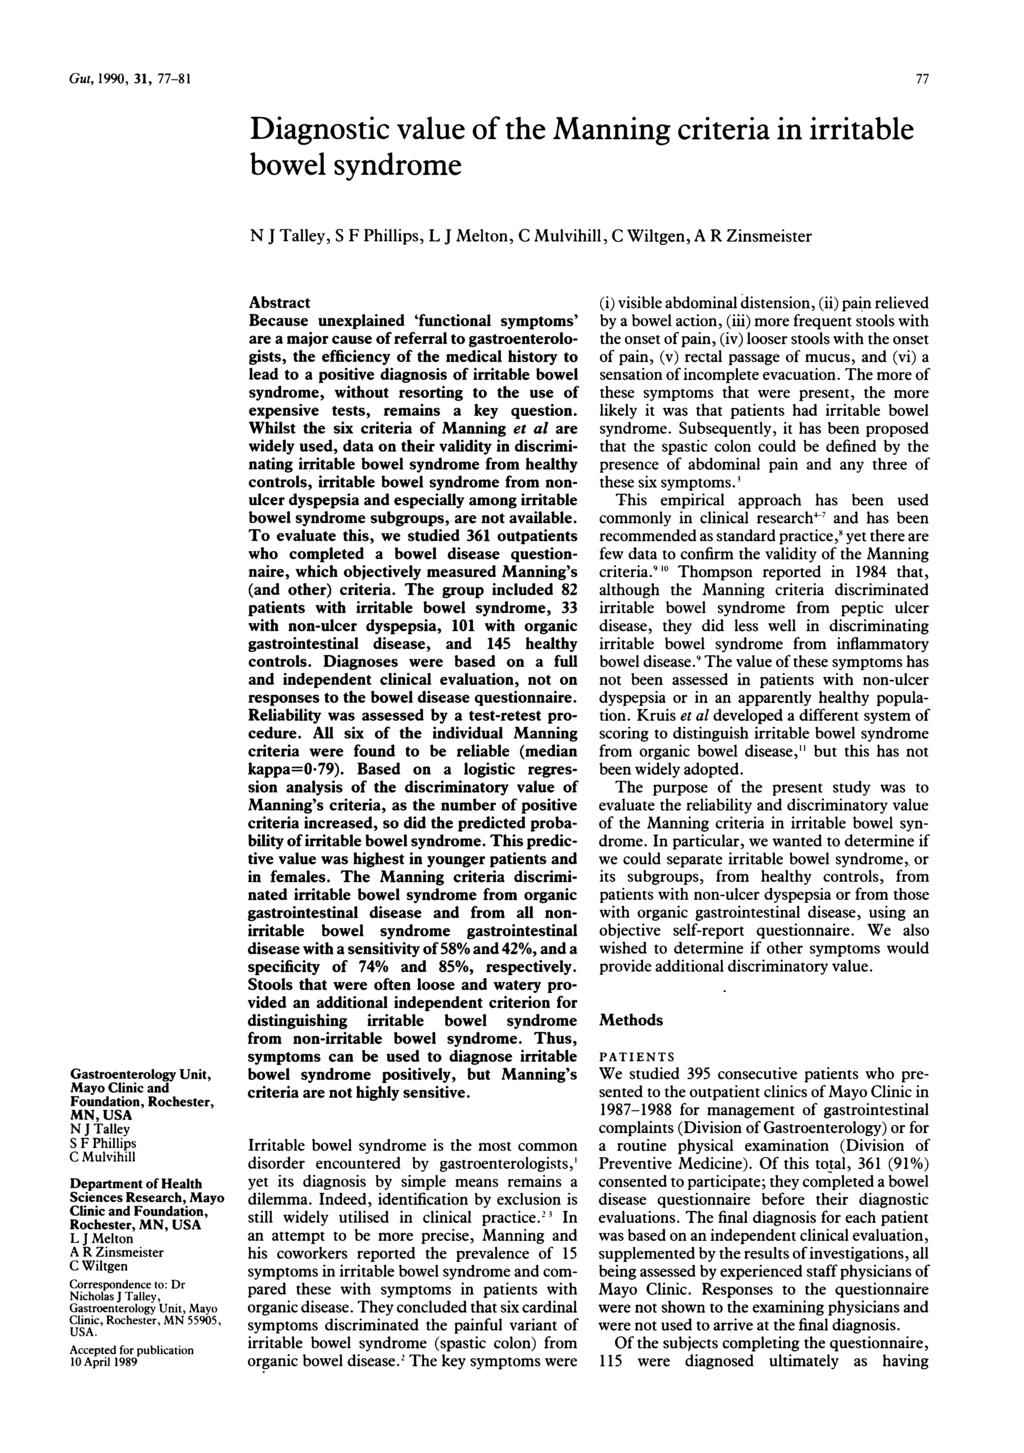 Gut, 1990, 31, 77-81 Diagnostic value of the Manning criteria in irritable bowel syndrome 77 N J Talley, S F Phillips, L J Melton, C Mulvihill, C Wiltgen, A R Zinsmeister Gastroenterology Unit, Mayo